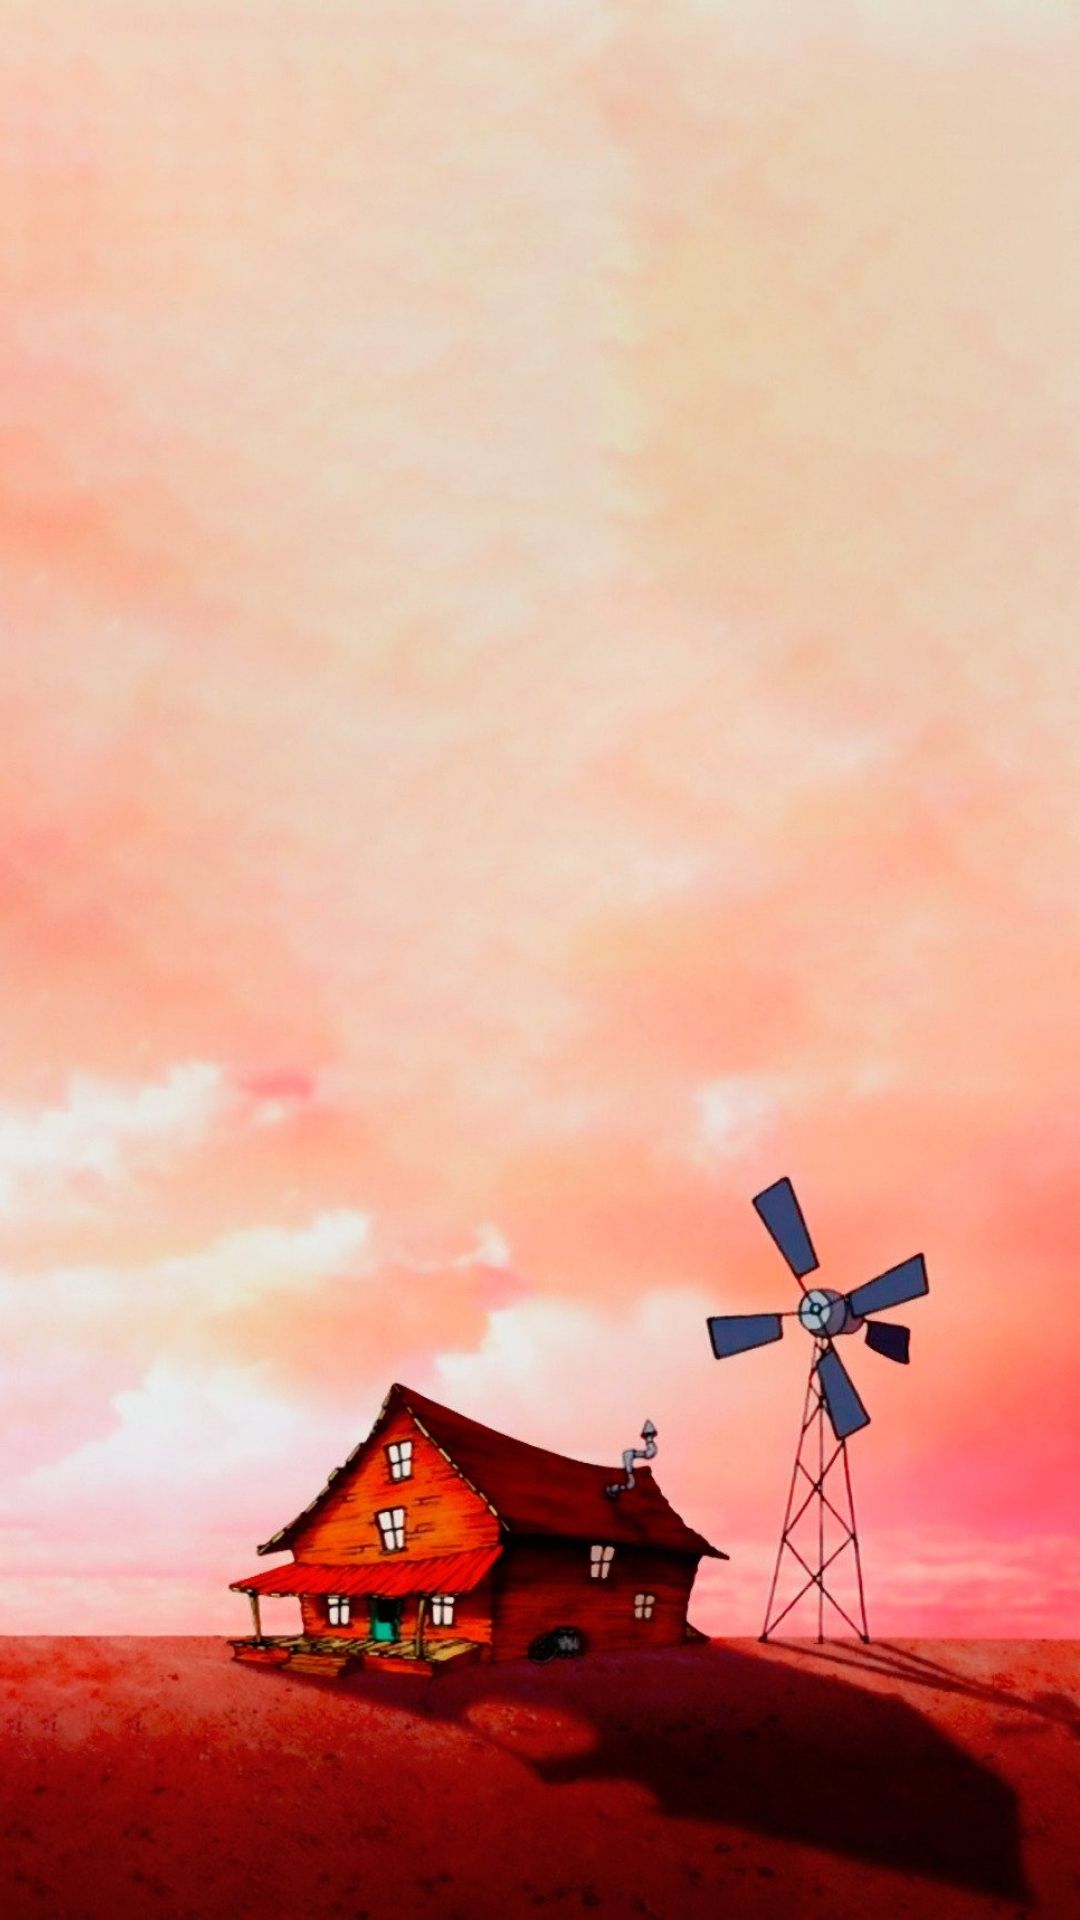 IPhone wallpaper of a house and windmill in a red sky - IPhone red